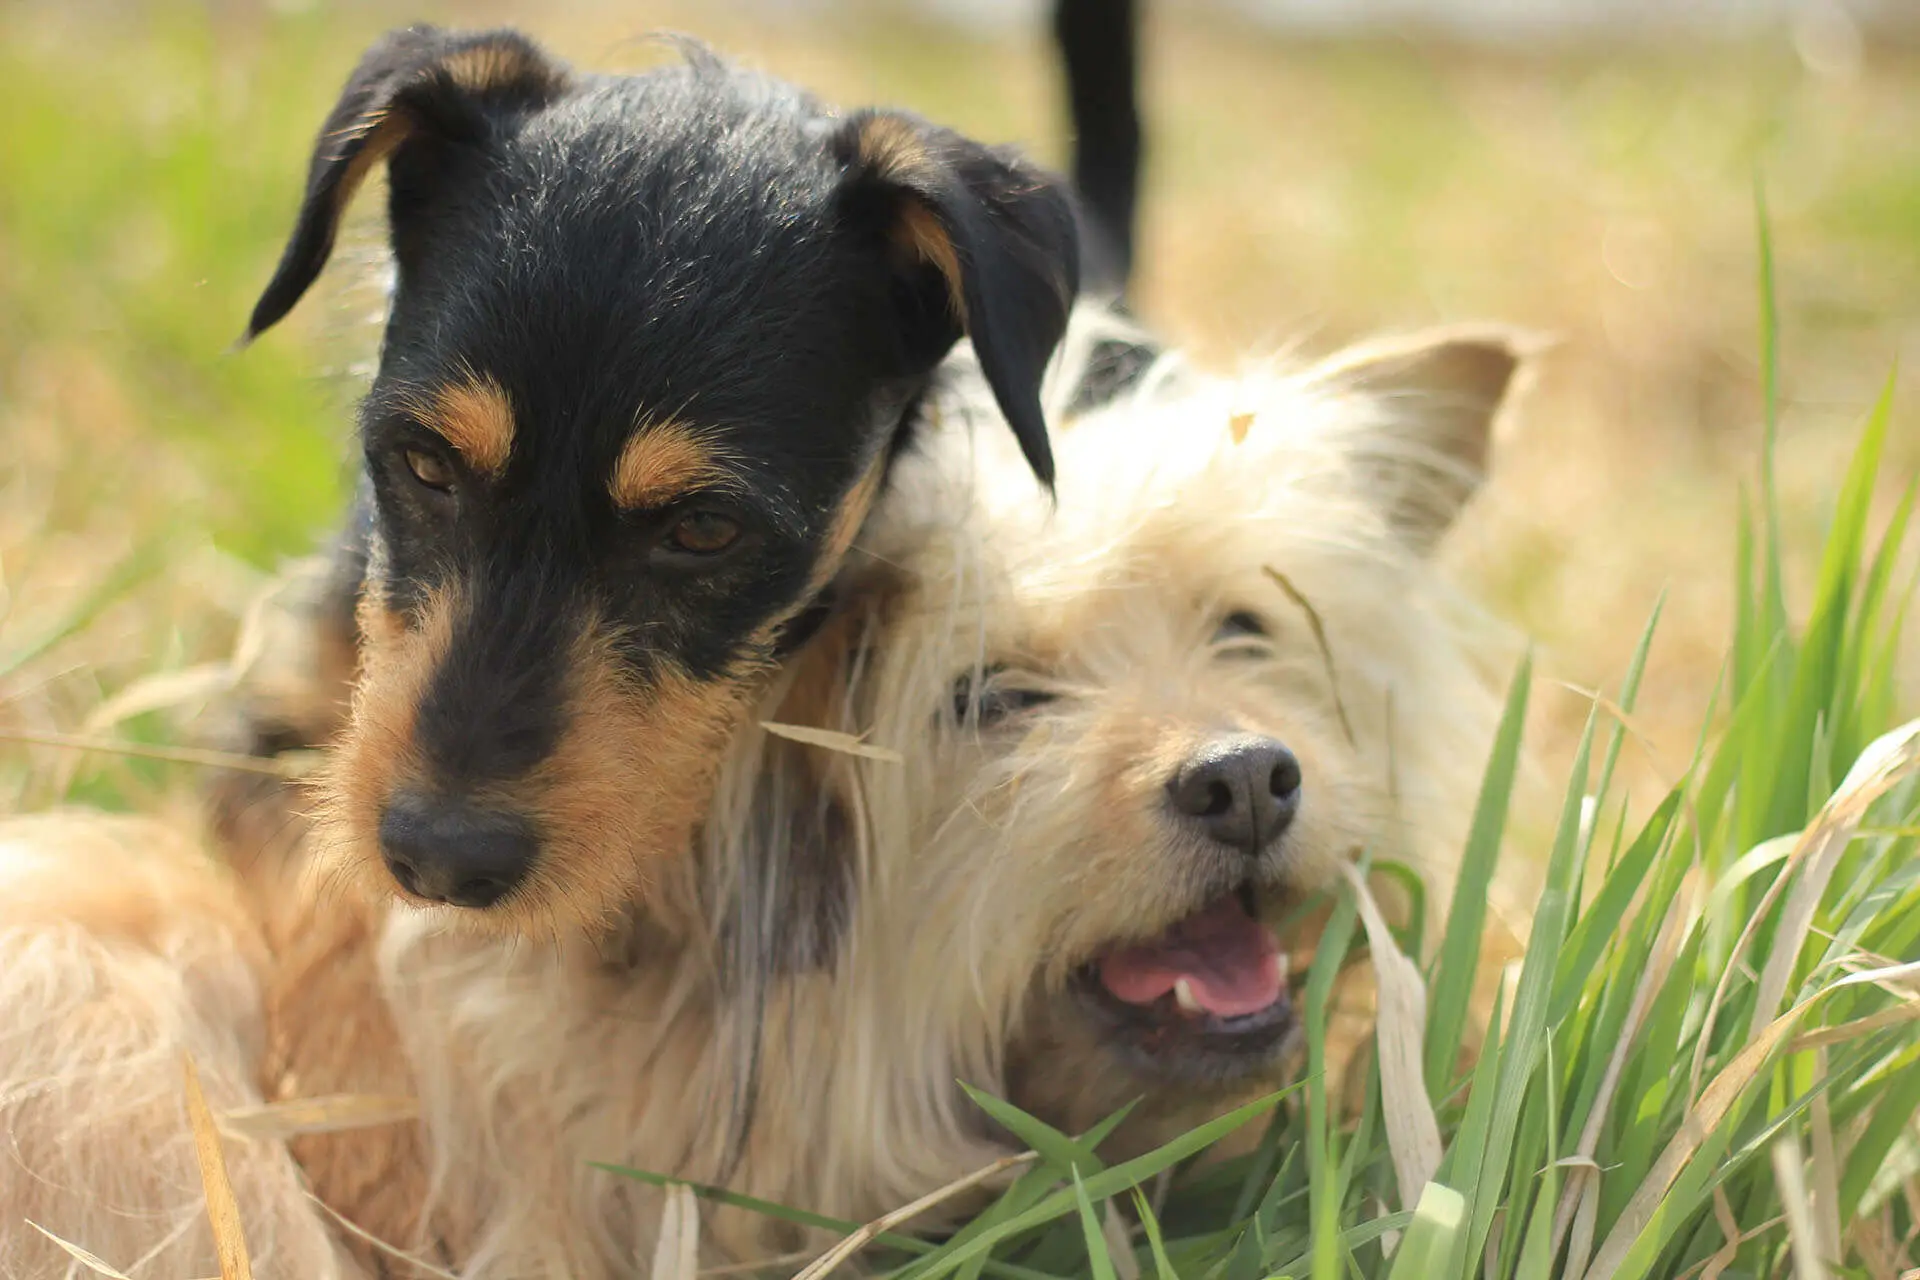 Two dogs playing together in the grass.